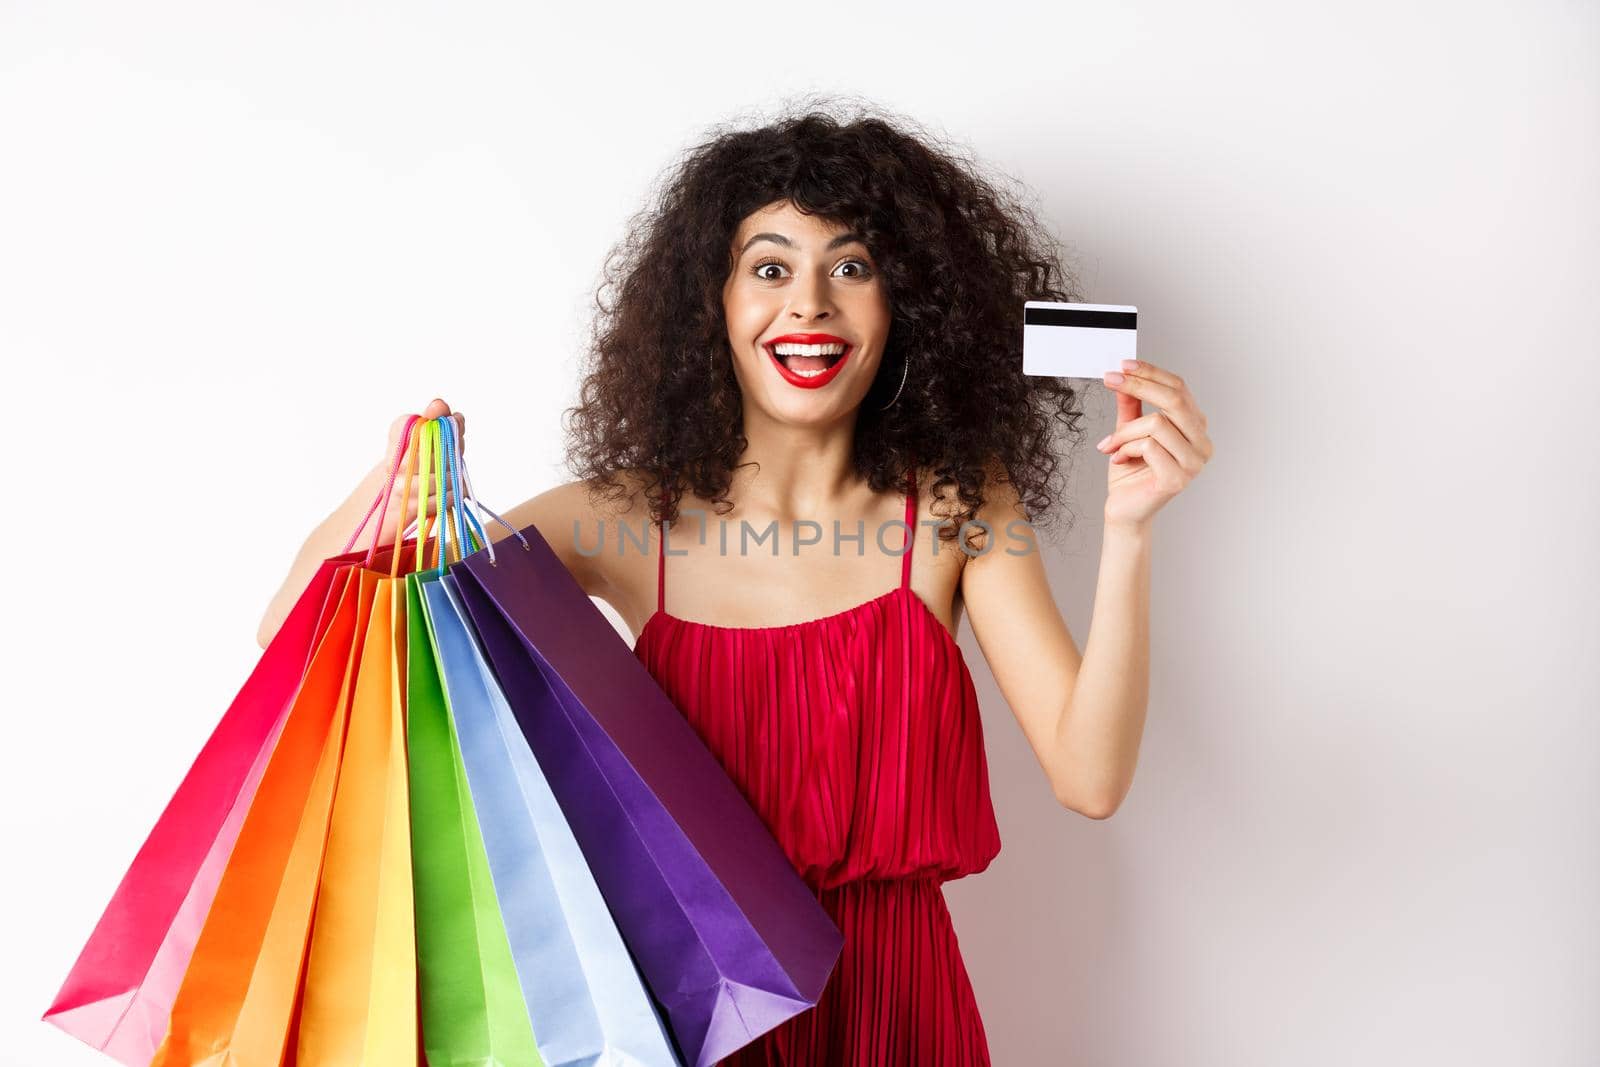 Stylish caucasian woman with curly hair and red dress, showing shopping bags and her plastic credit card, smiling amused, standing over white background.